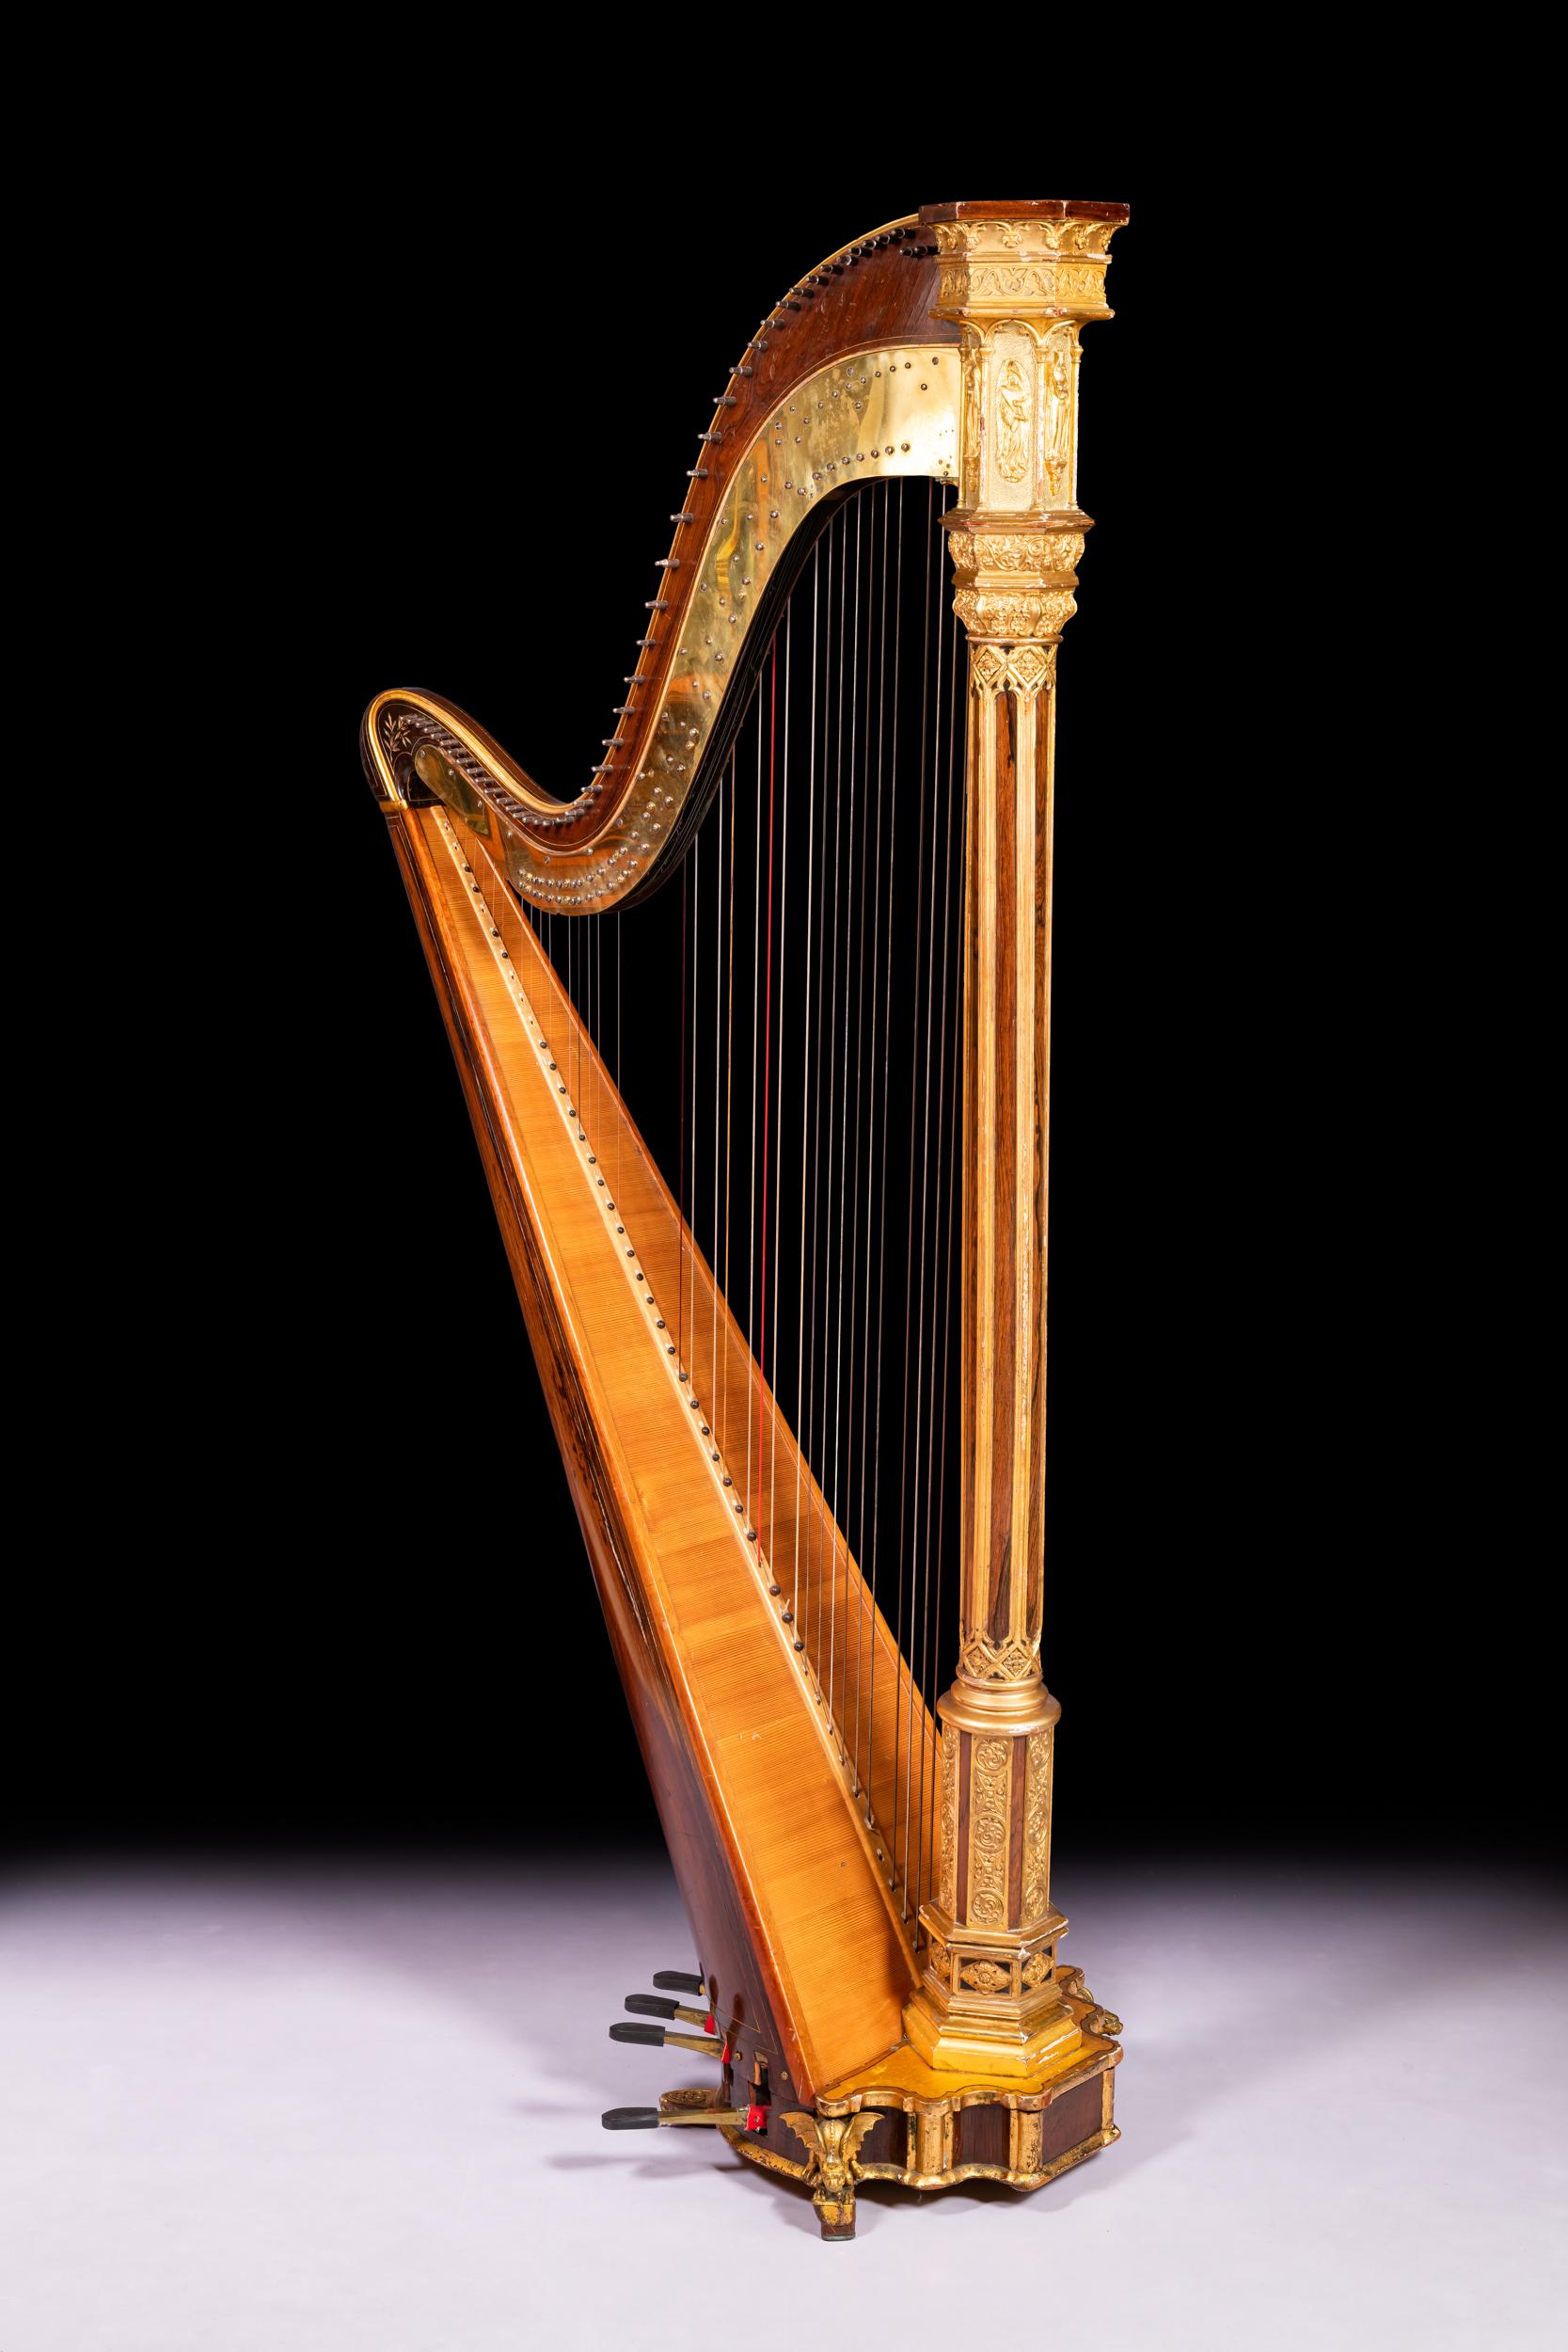 English Early 19th Century Parcel Gilt Gothic Revival Harp By Sebastian Erard For Sale